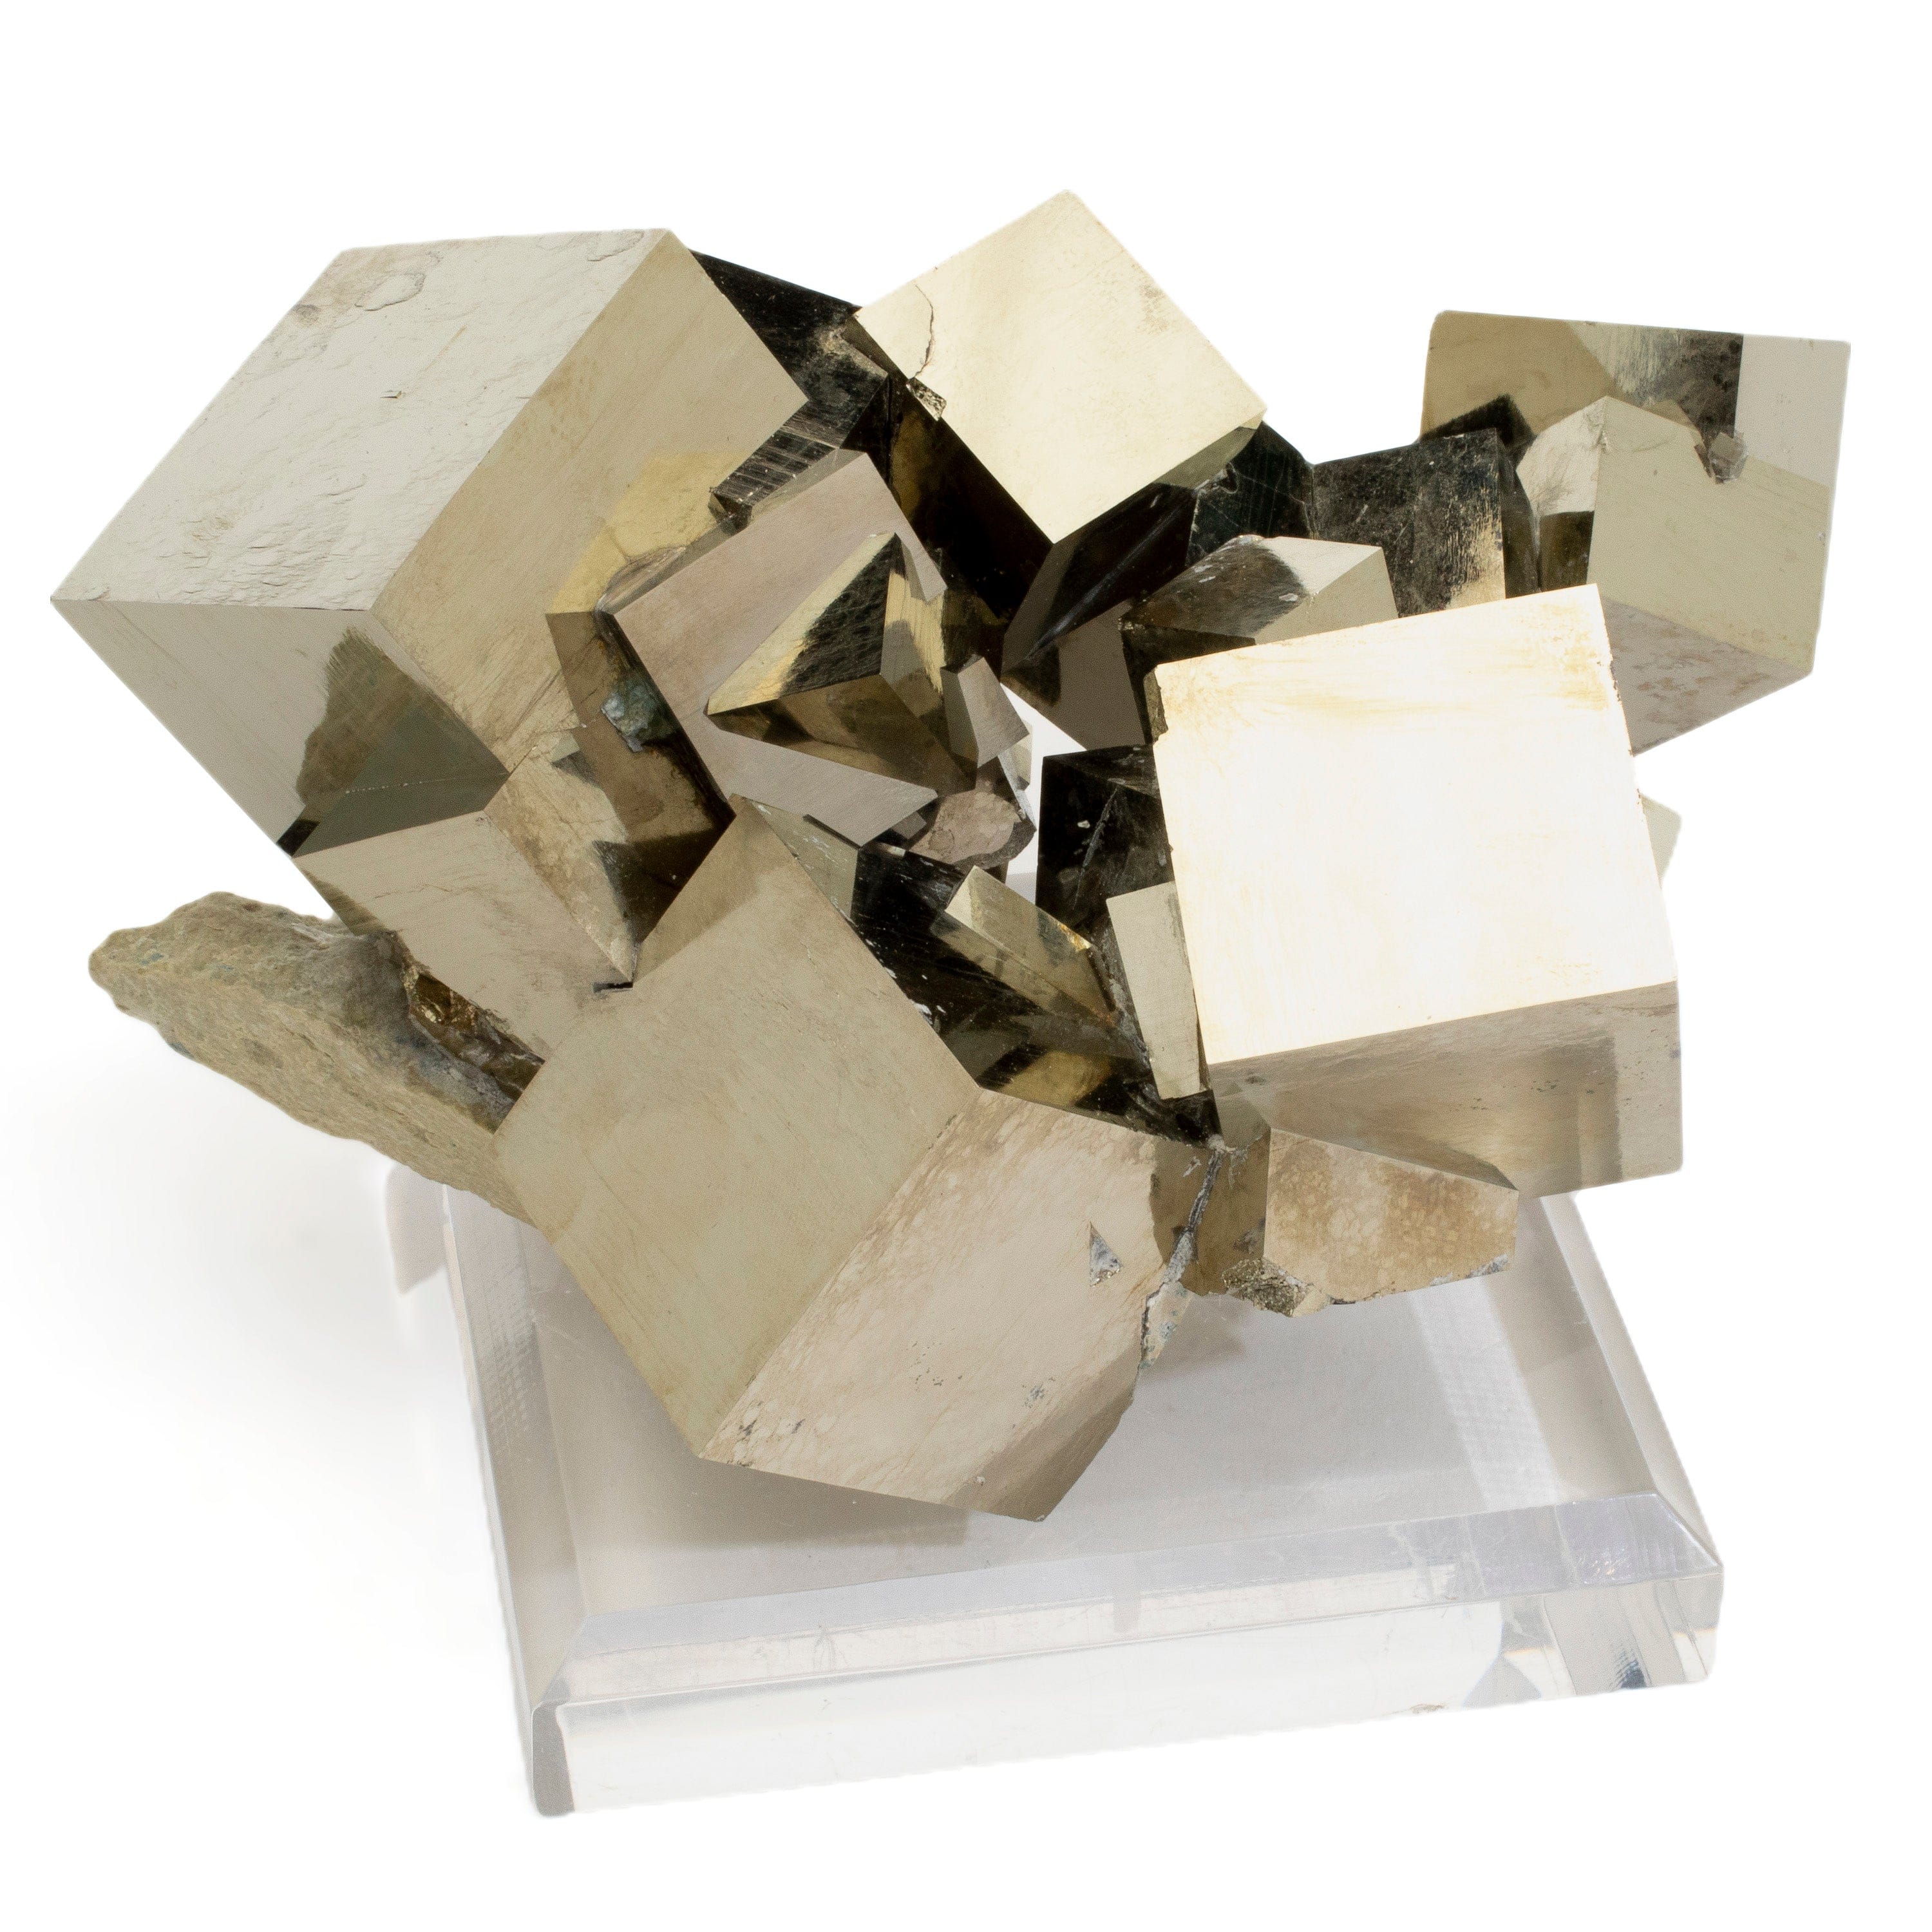 Kalifano Pyrite Natural Pyrite Cube Cluster from Spain with Detachable Base -  4.5" / 1,990g SPC28000.001